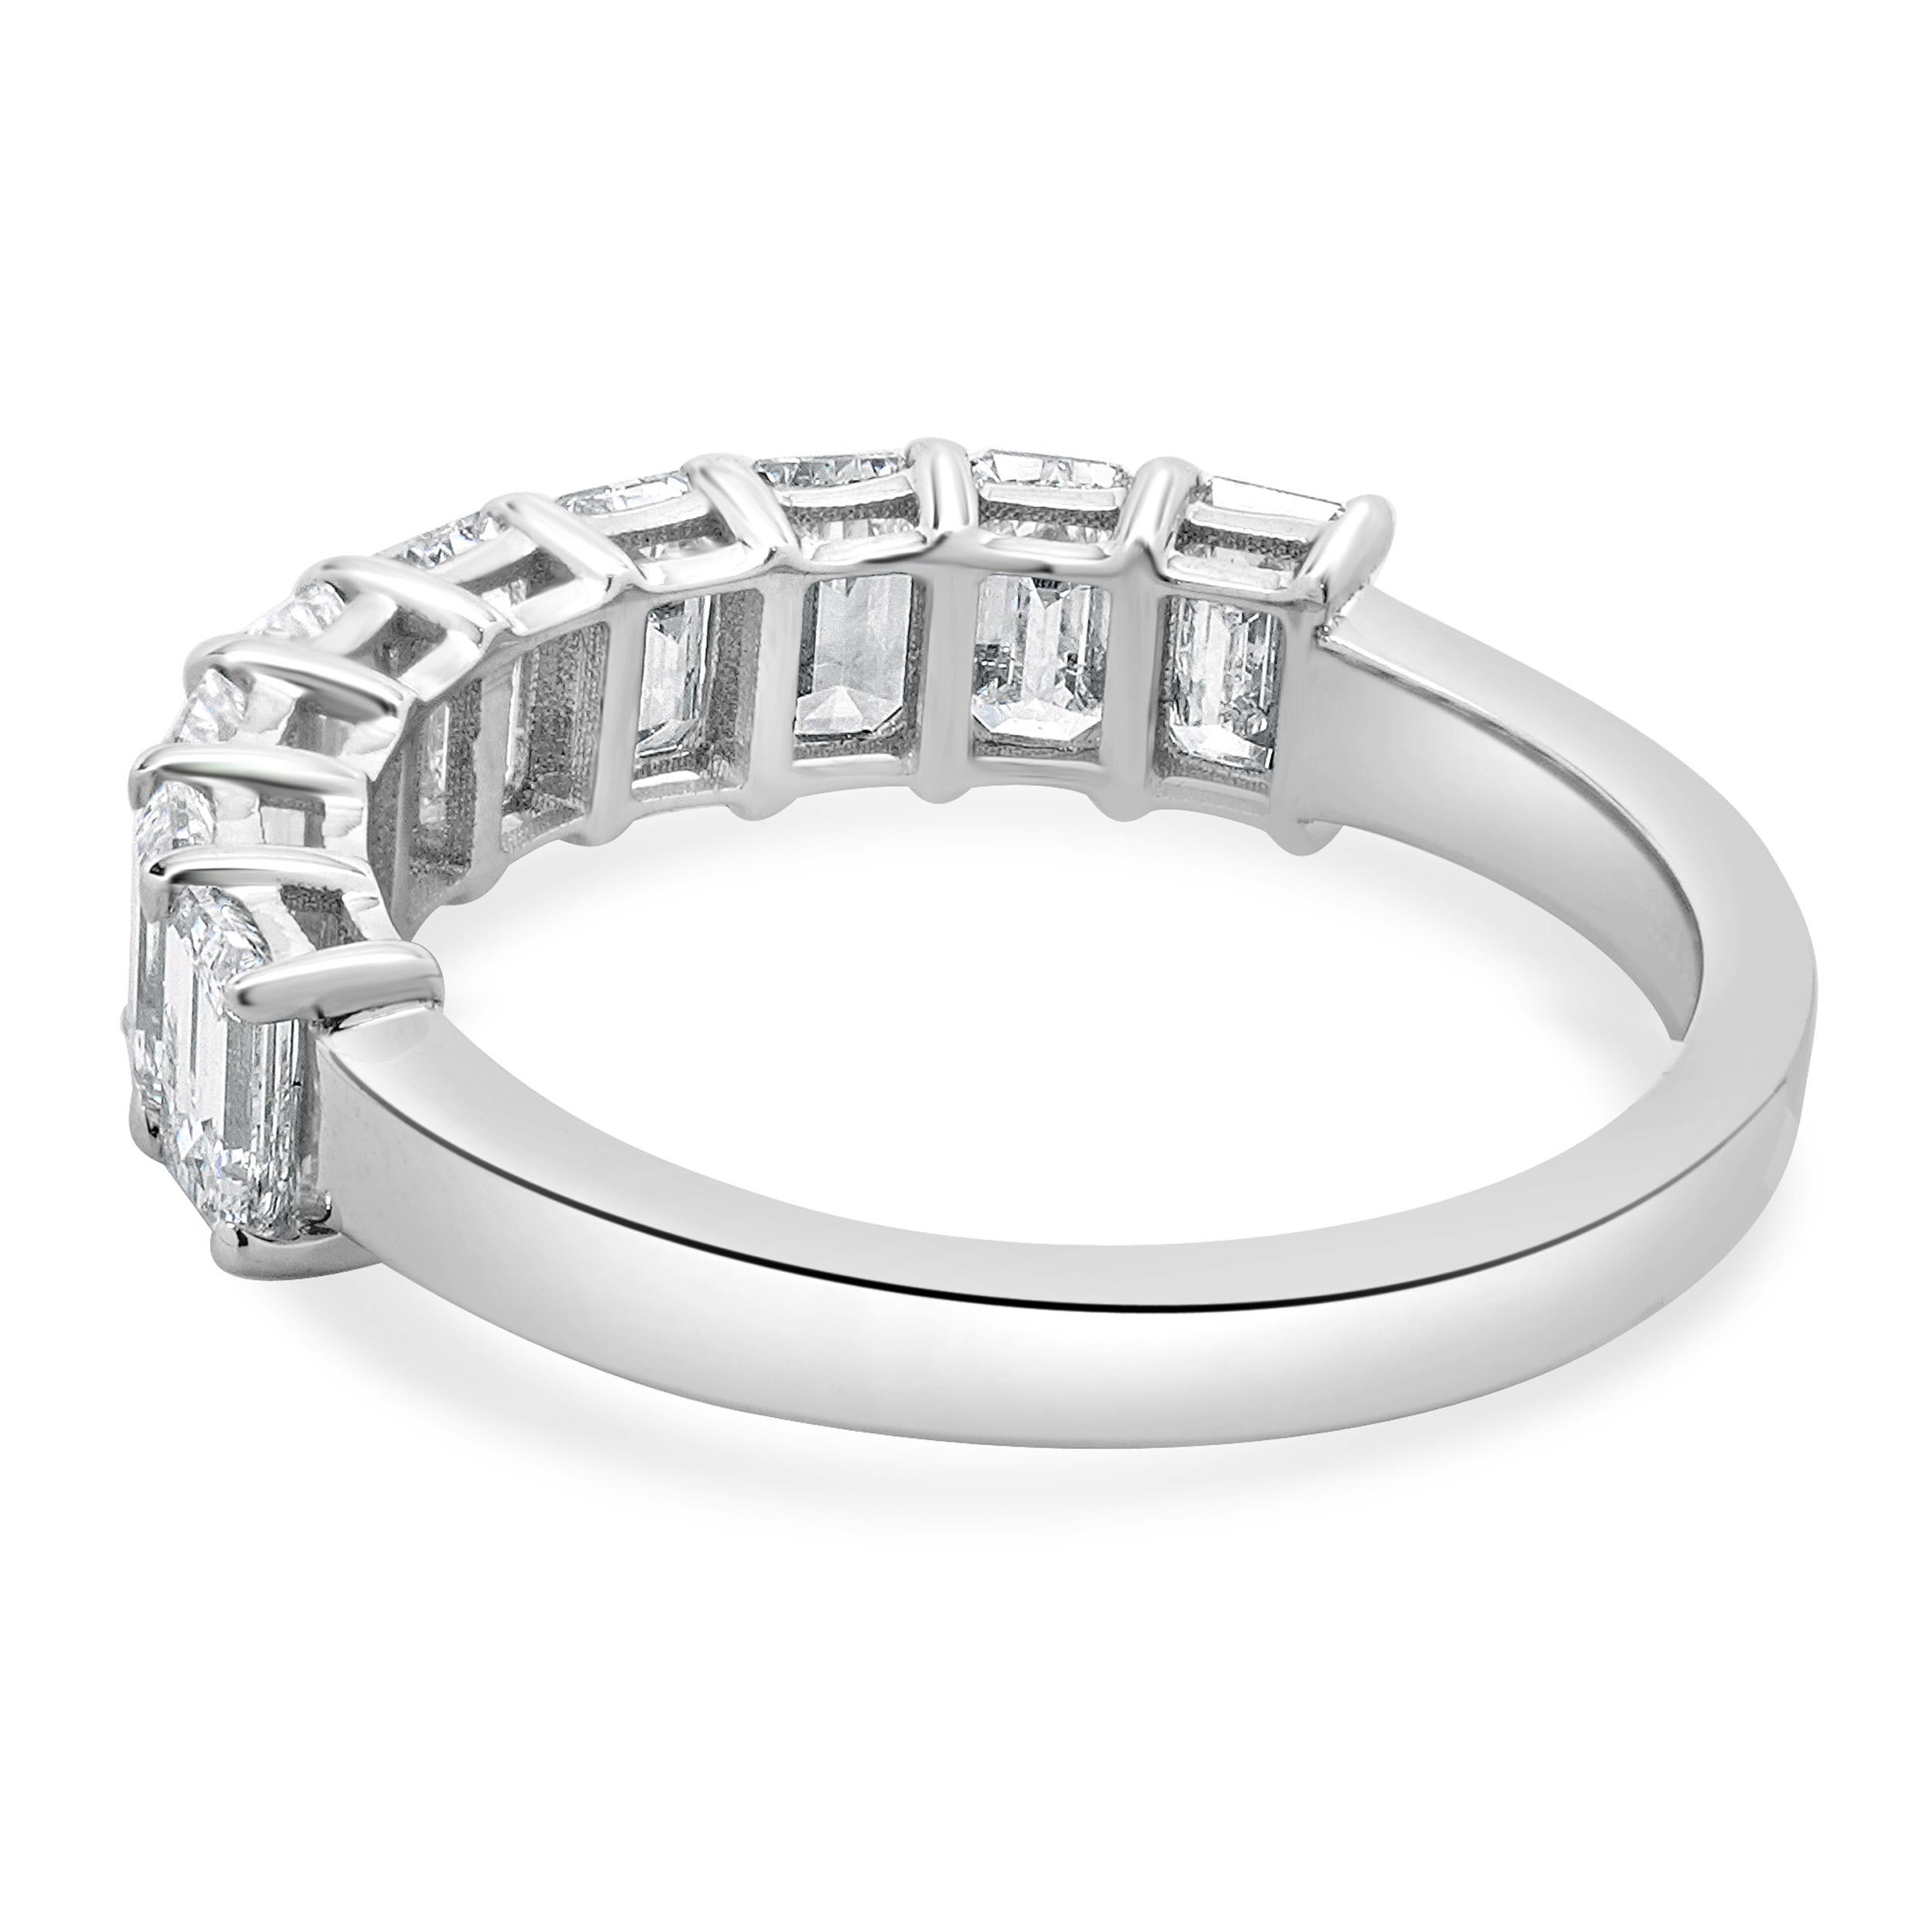 14 Karat White Gold Emerald Cut Diamond Band In Excellent Condition For Sale In Scottsdale, AZ